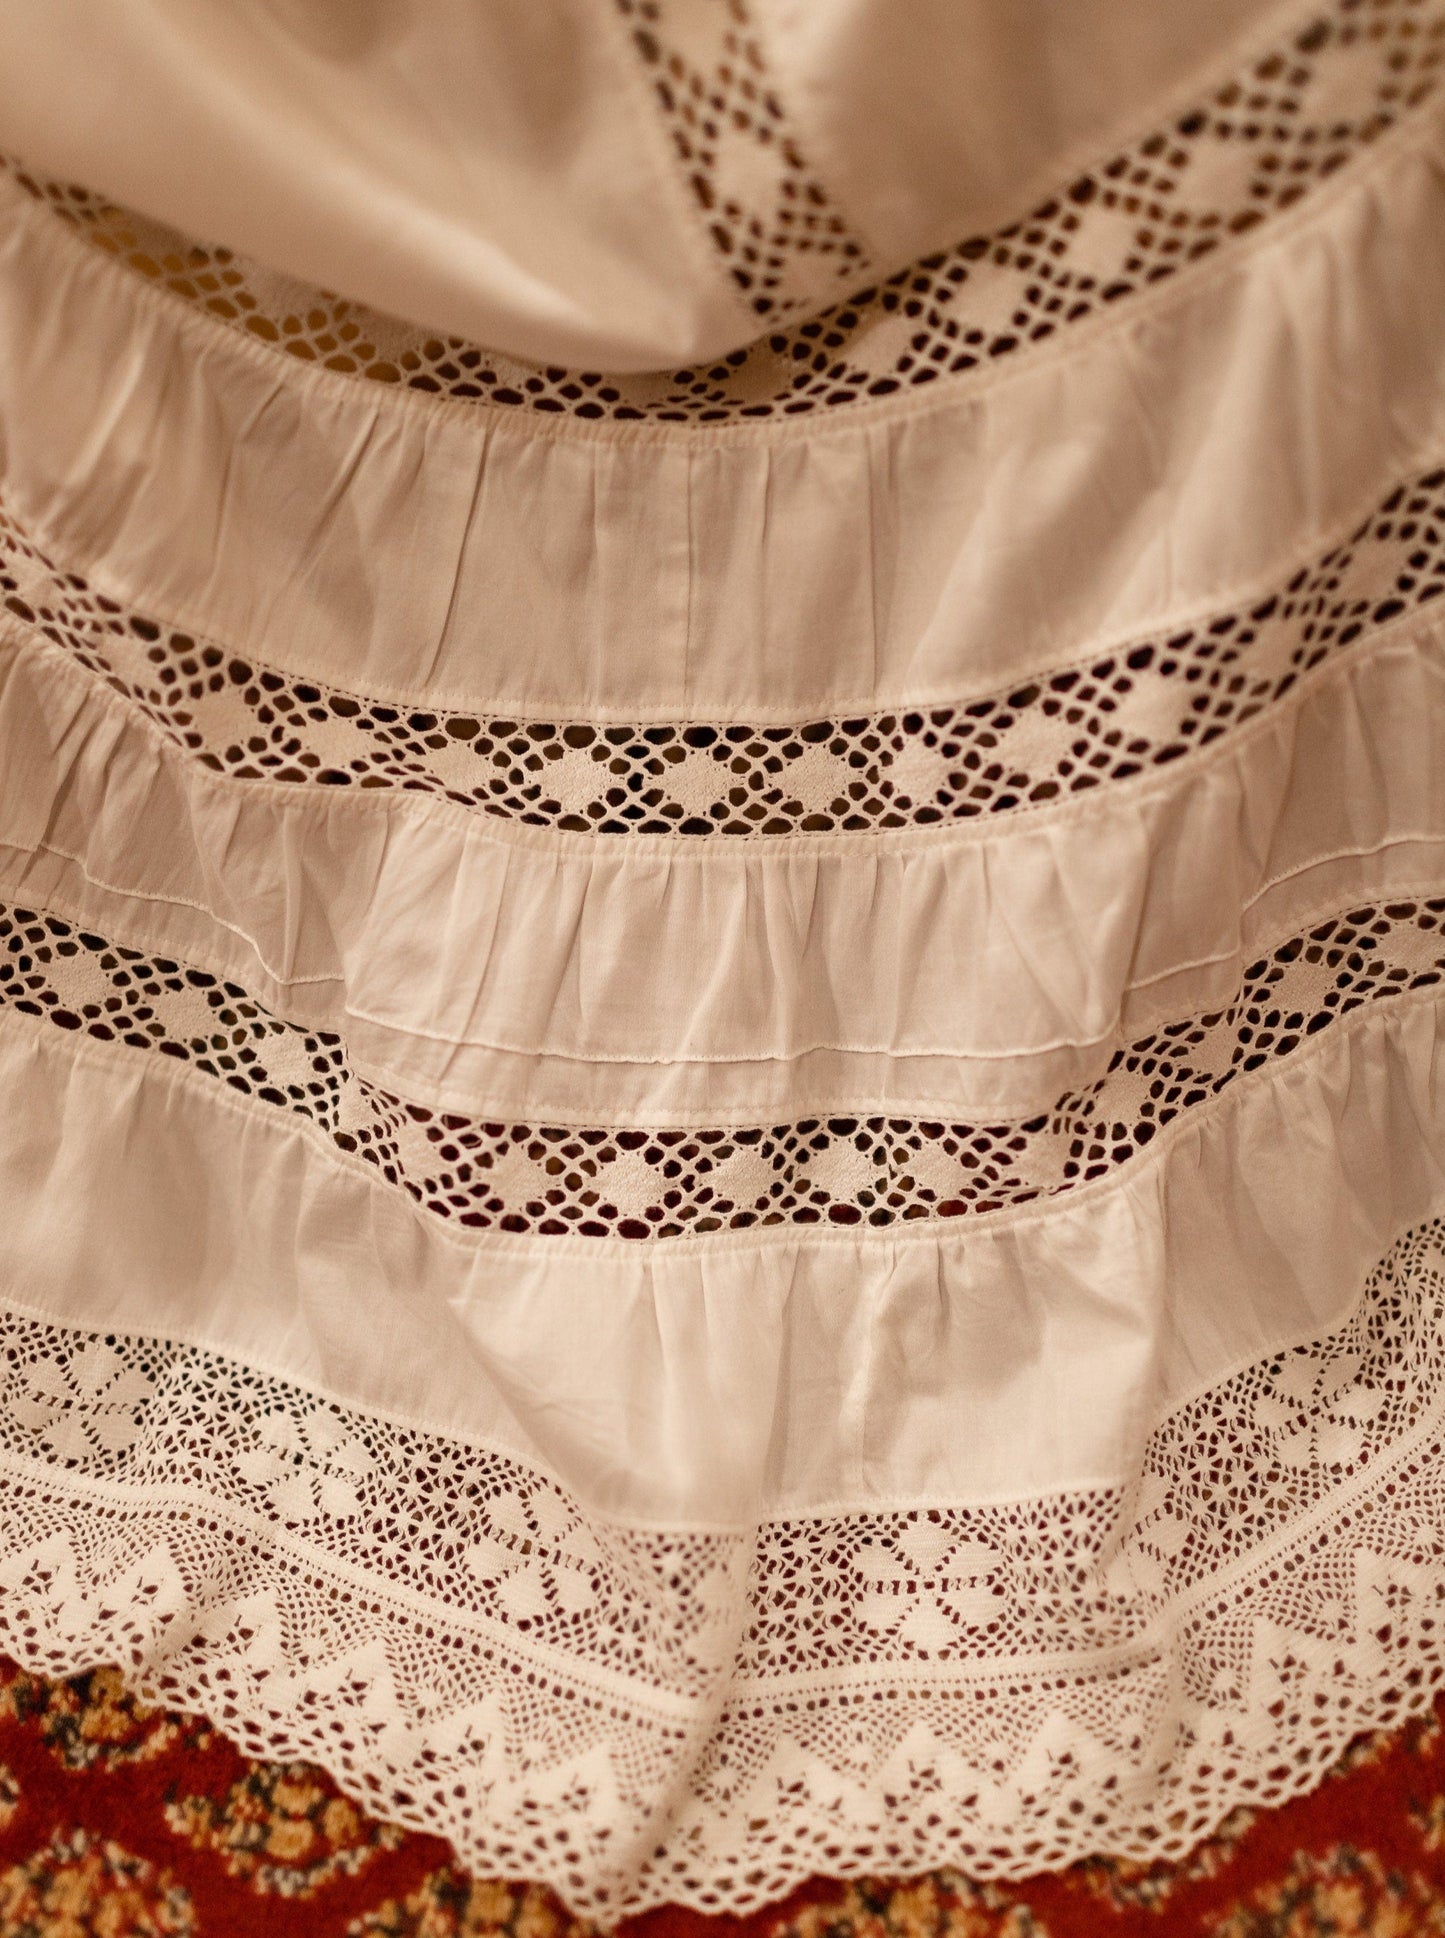 Delicate Beauty - Victorian Inspired Night Gown in White Cotton